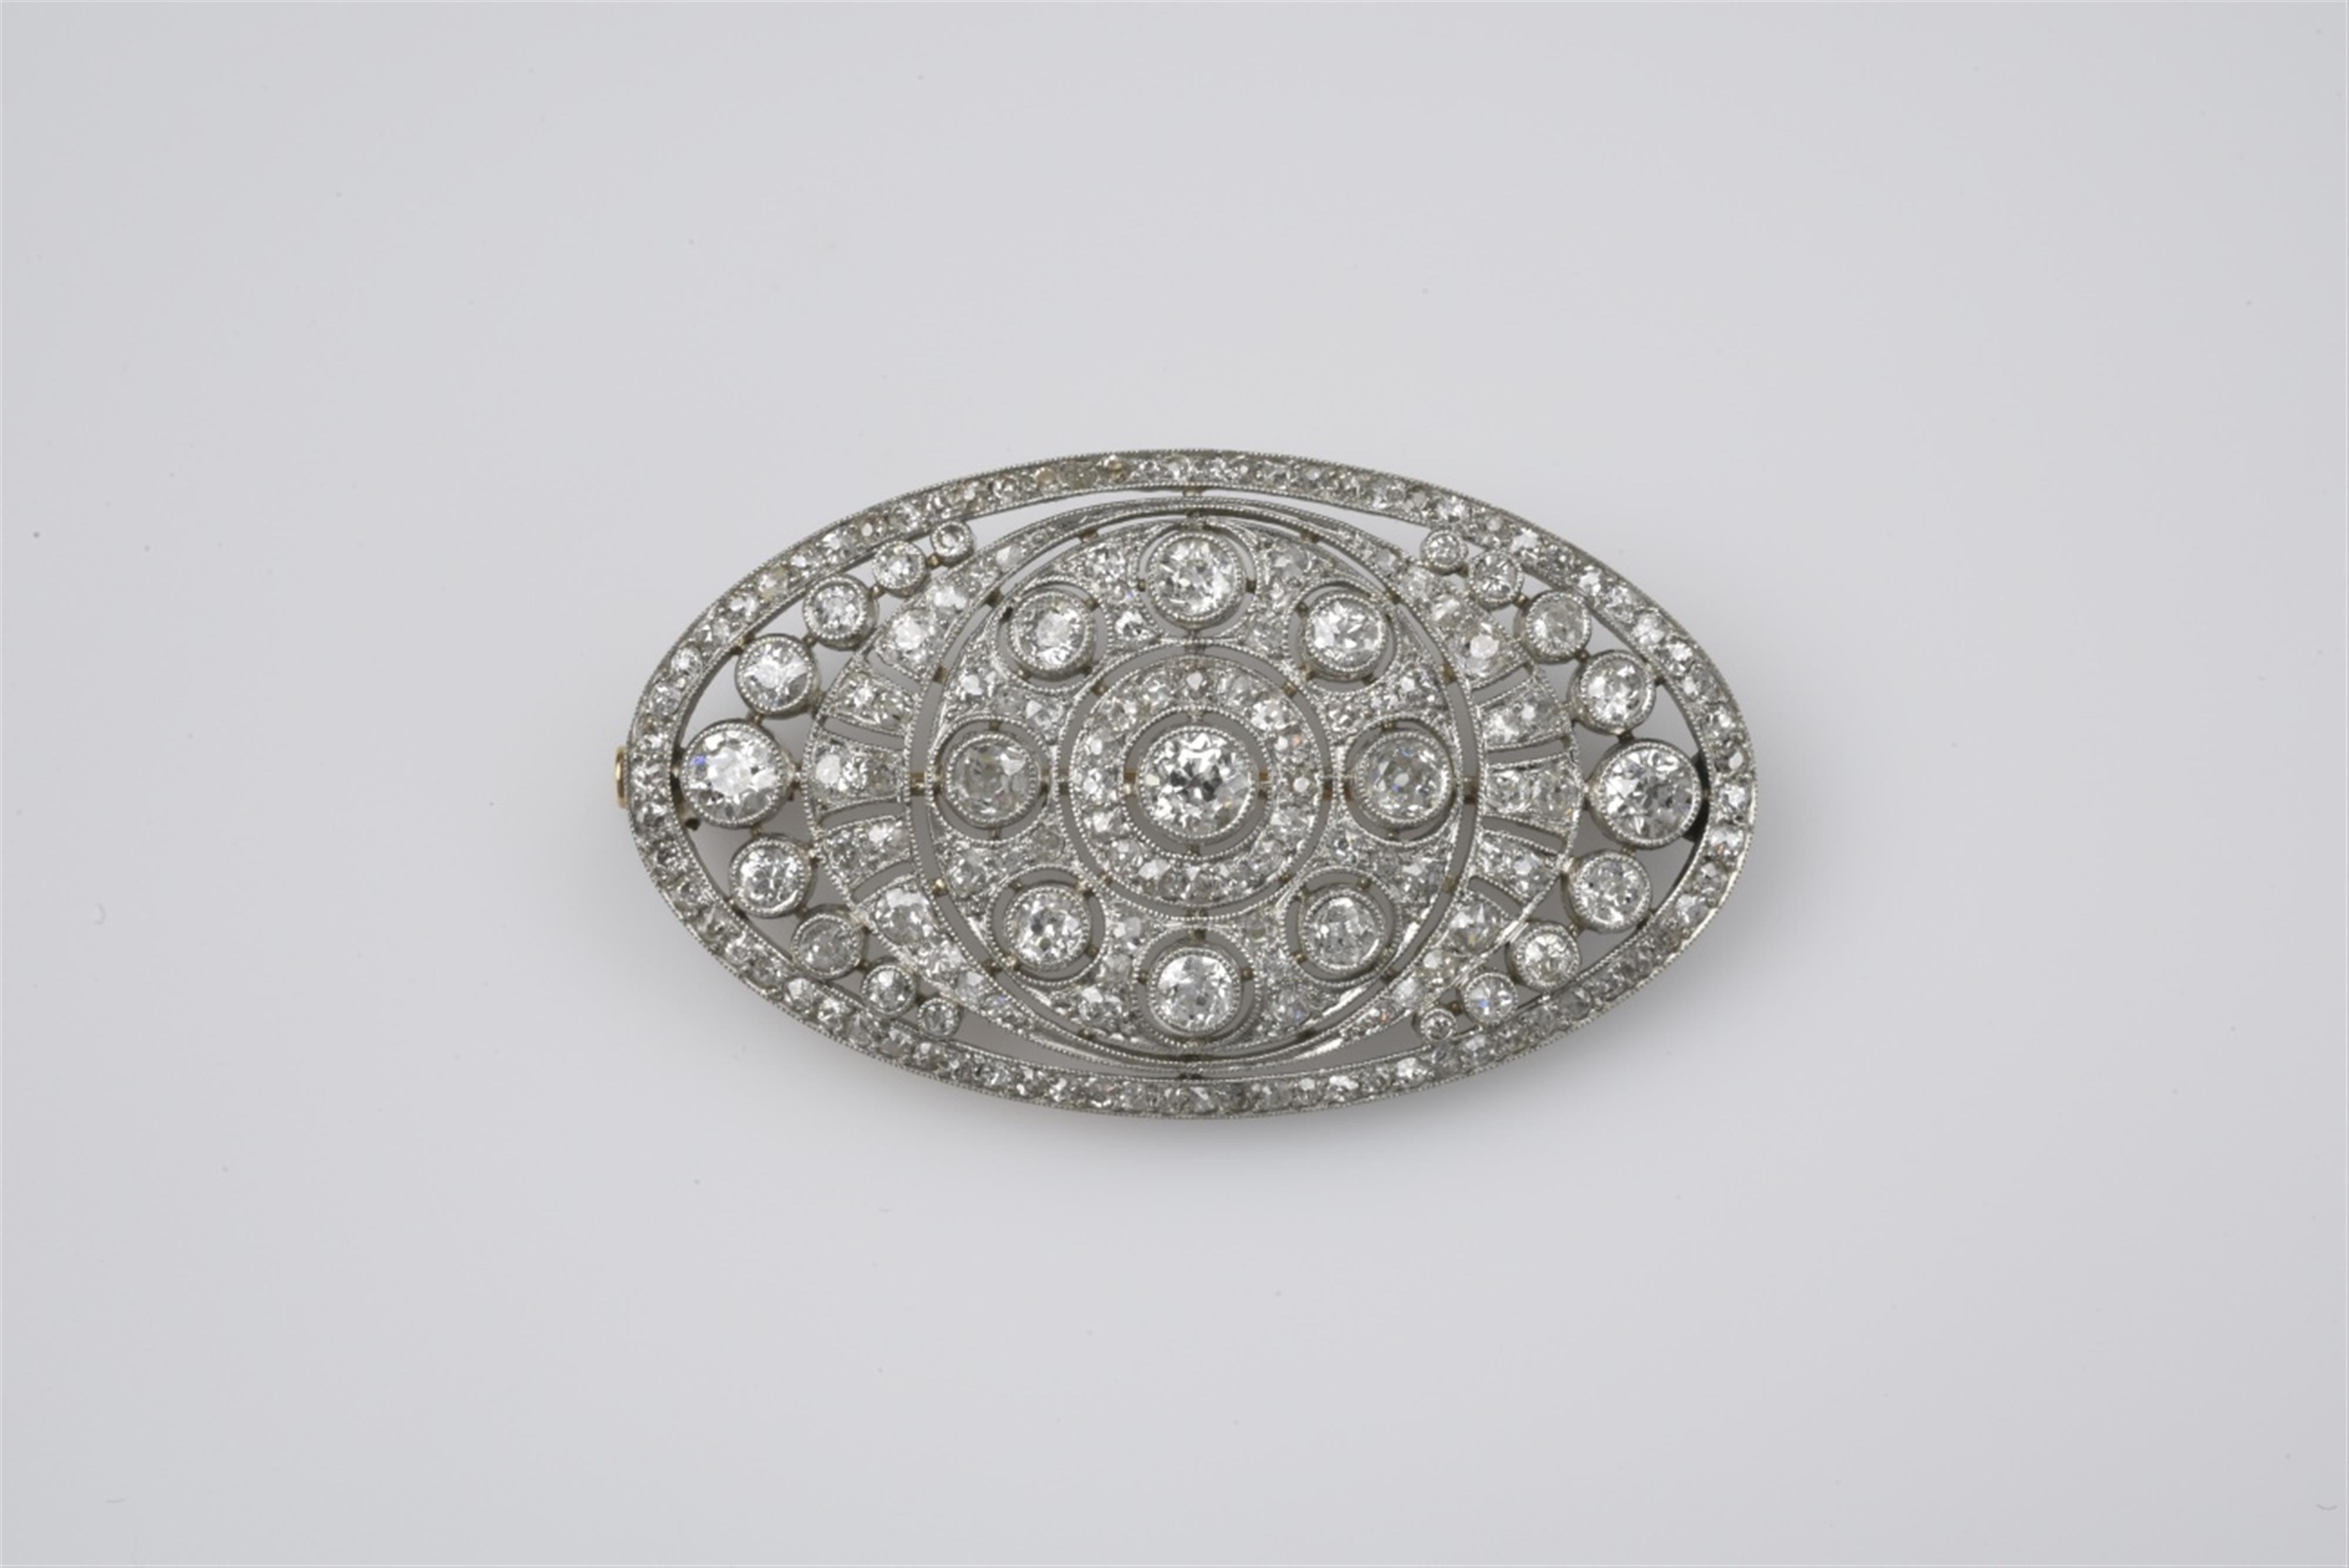 A 14k gold, platinum, and diamond Belle Epoque brooch - image-1